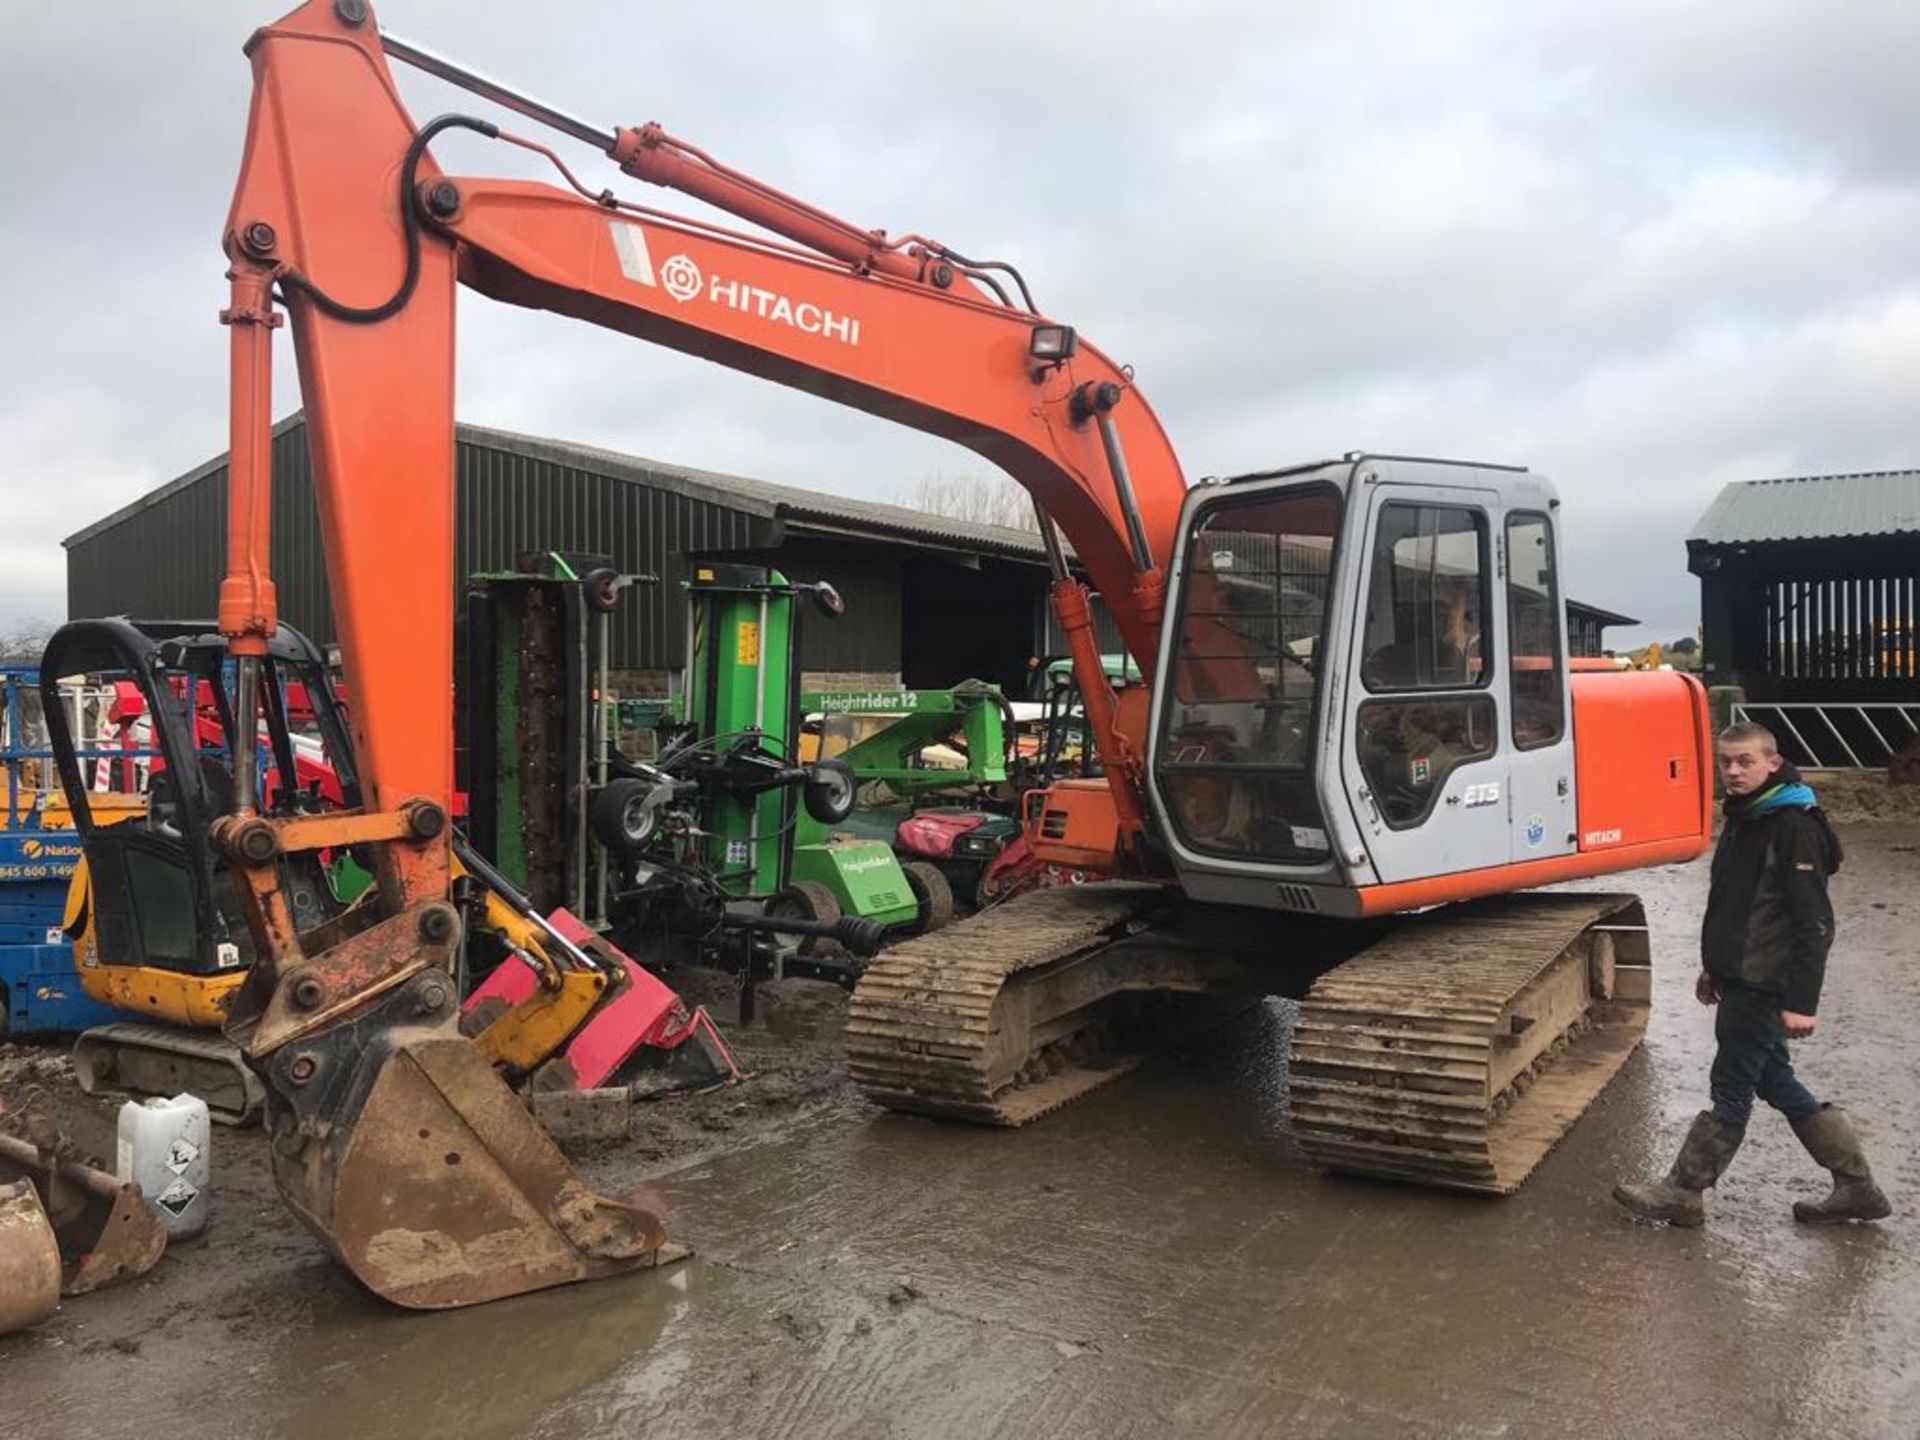 10 TONNE HITACHI DIGGER / EXCAVATOR, ALL GOOD AND WORKING, CLEAN & TIDY, SHOWING 6,021 HOURS